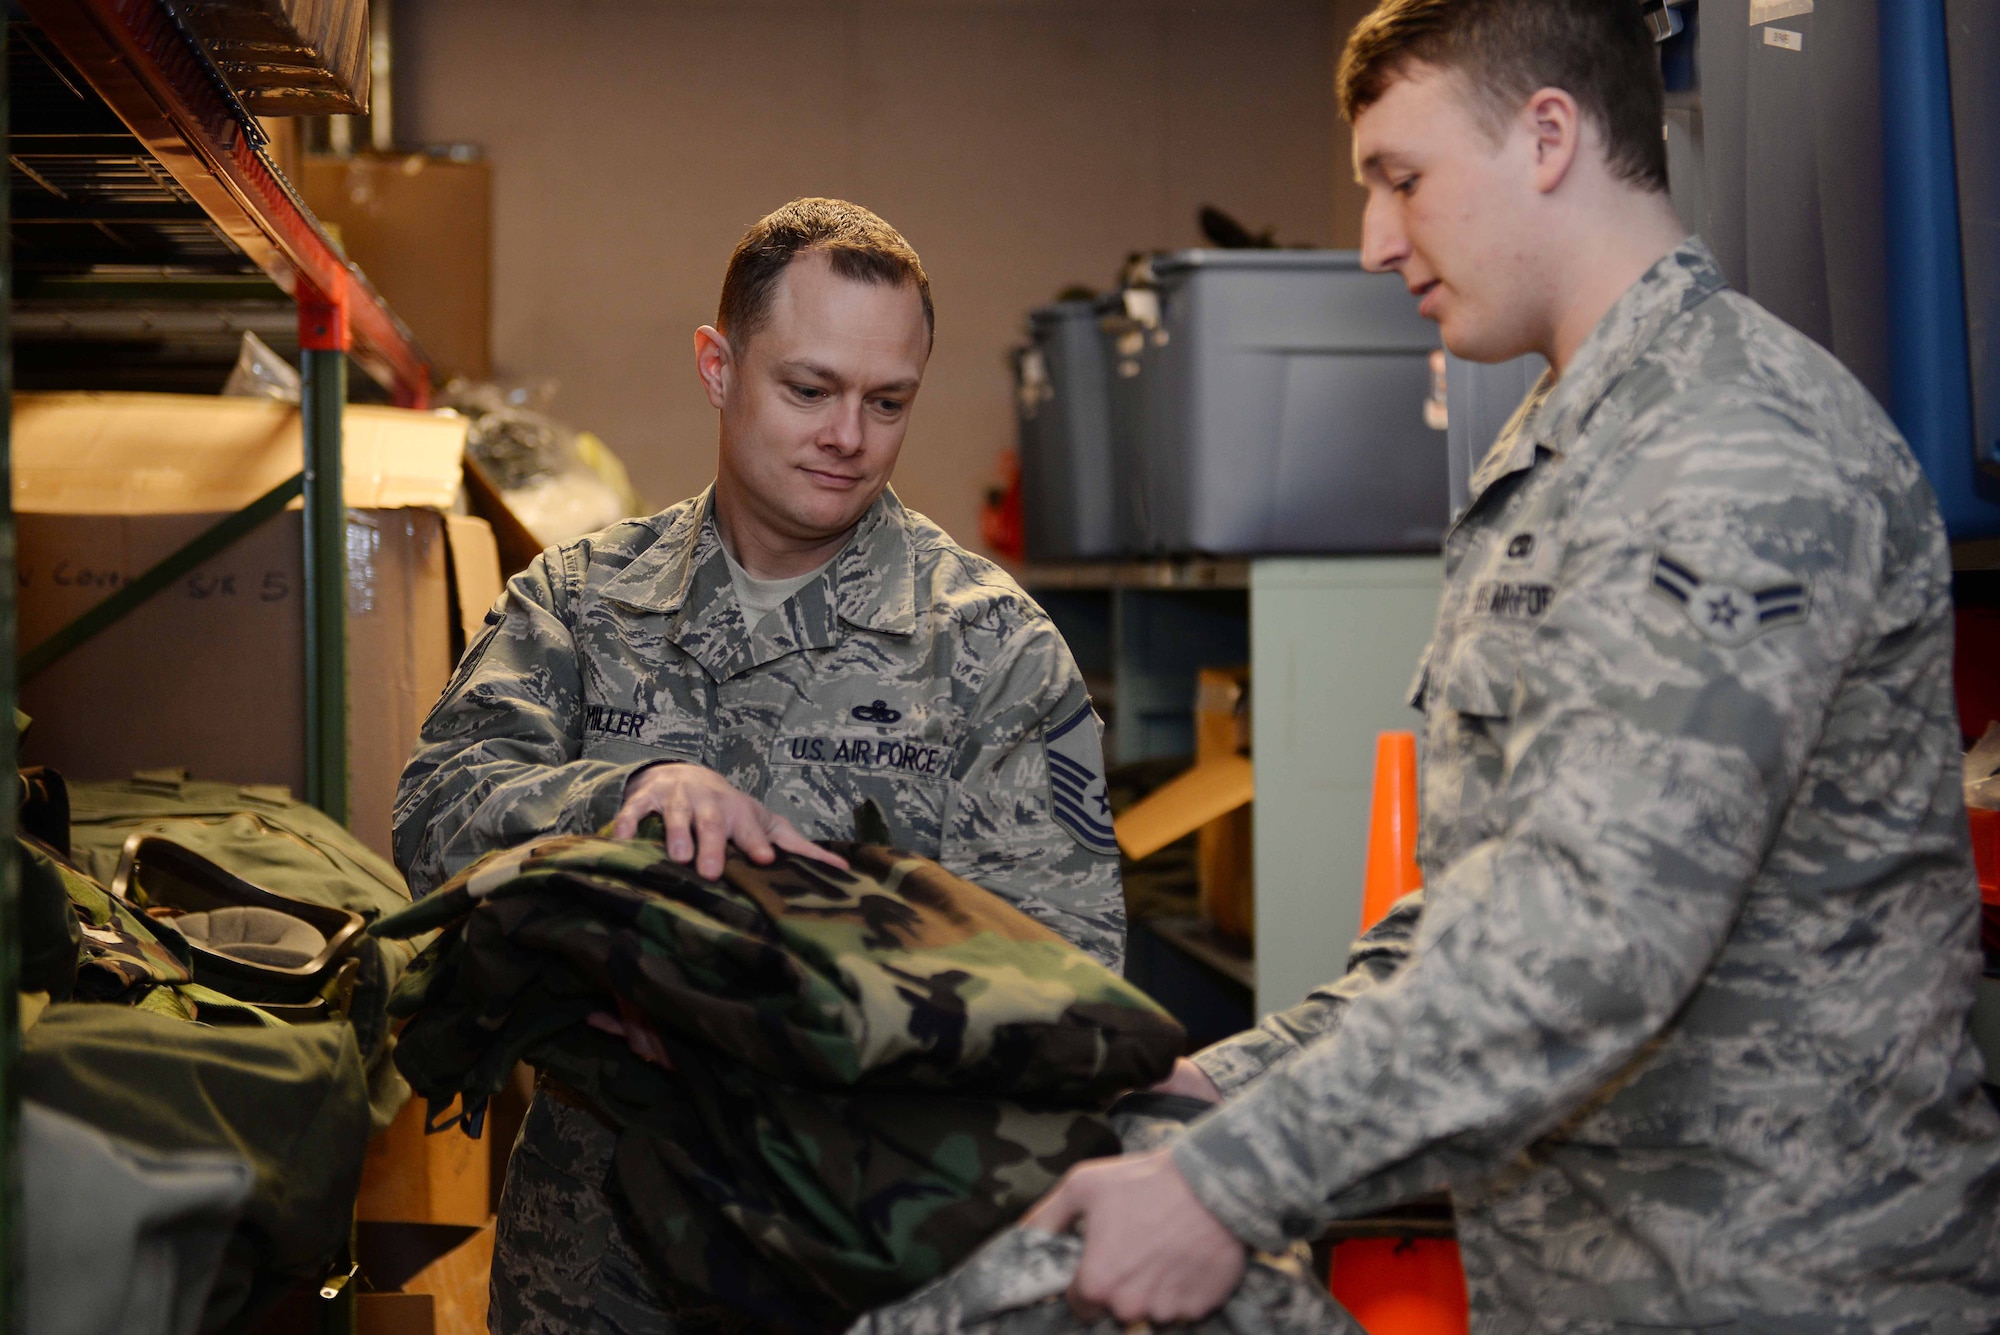 Master Sgt. Matthew Miller, 28th Maintenance Squadron unit deployment manager, issues Airman 1st Class Matthew Gallagher, 28th MXS avionics test station technician, chemical environment training gear at Ellsworth Air Force Base, S.D., March 4, 2015. Prior to deployments and base exercises, Ellsworth’s UDMs ensure Airmen are outfitted with gear to operate in a simulated chemical environment. (U.S. Air Force photo by Airman 1st Class Rebecca Imwalle/Released) 